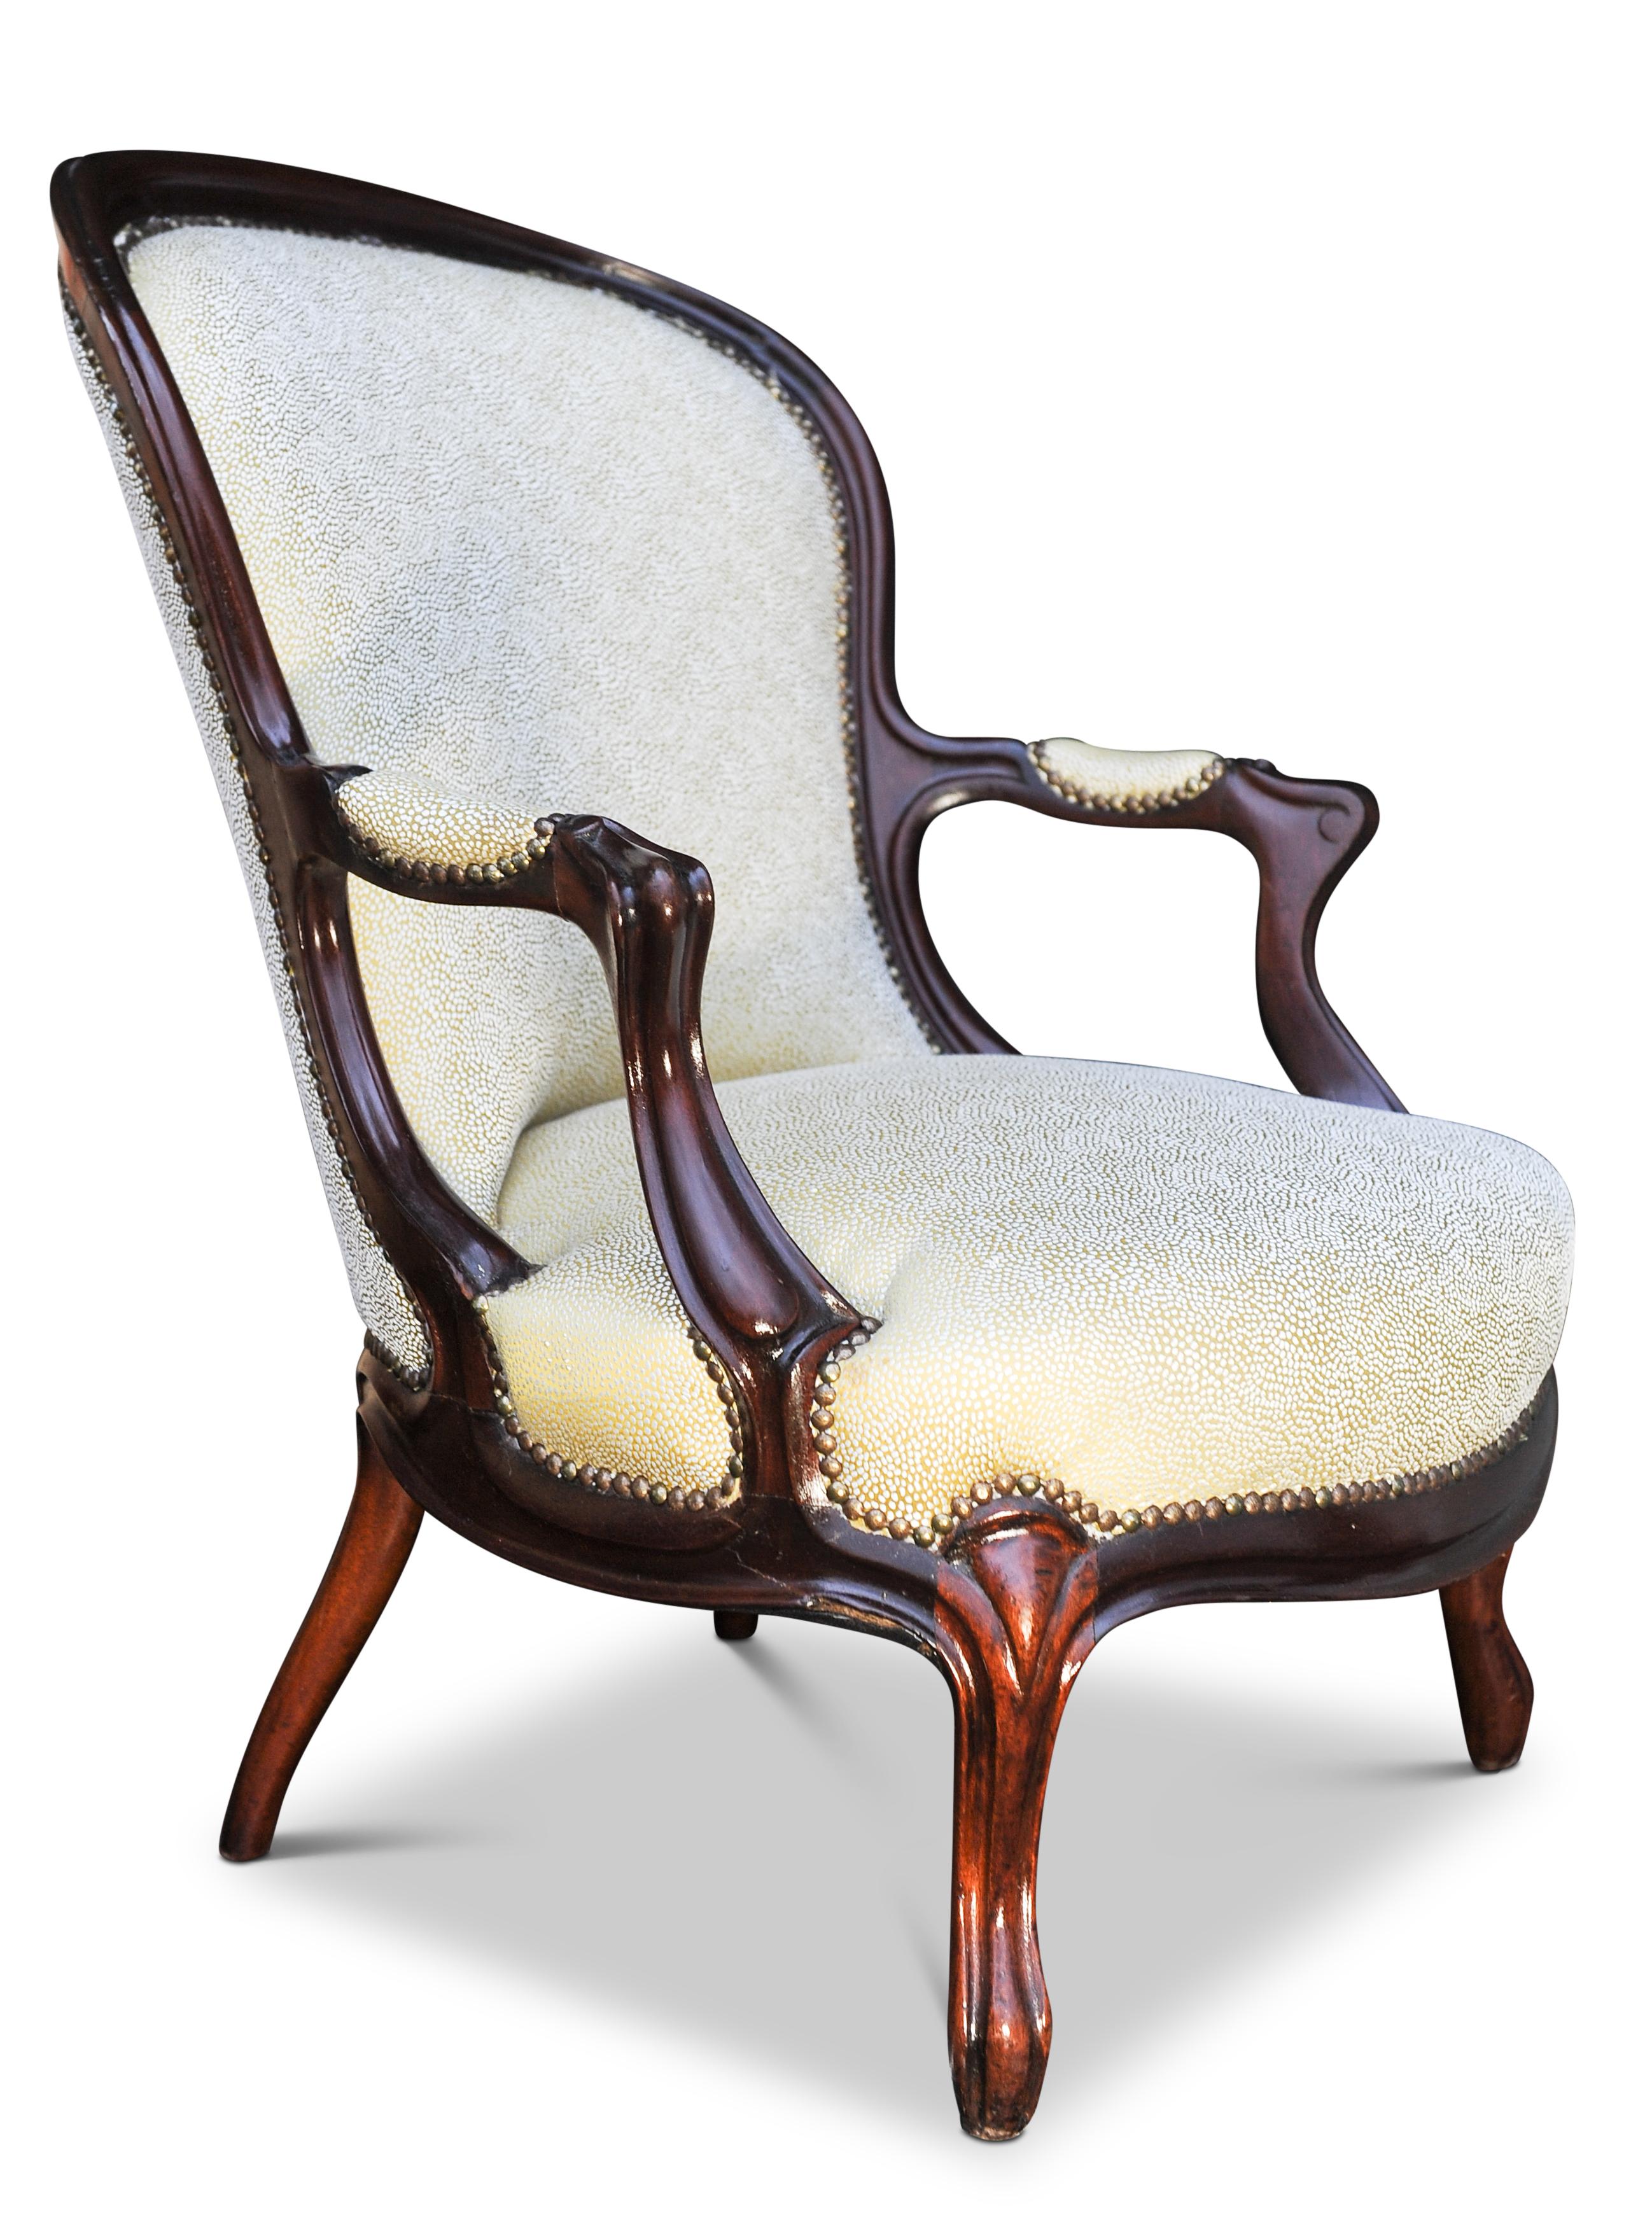 An Elegant Pair of Victorian Shagreen Upholstered Framed Spoon Back Open Armchairs.

Beautiful warm mahogany frames with a luxurious shagreen effect silk upholstery to both armchairs.

Would compliment any Living room, Lounge Parlour Setting

Extra